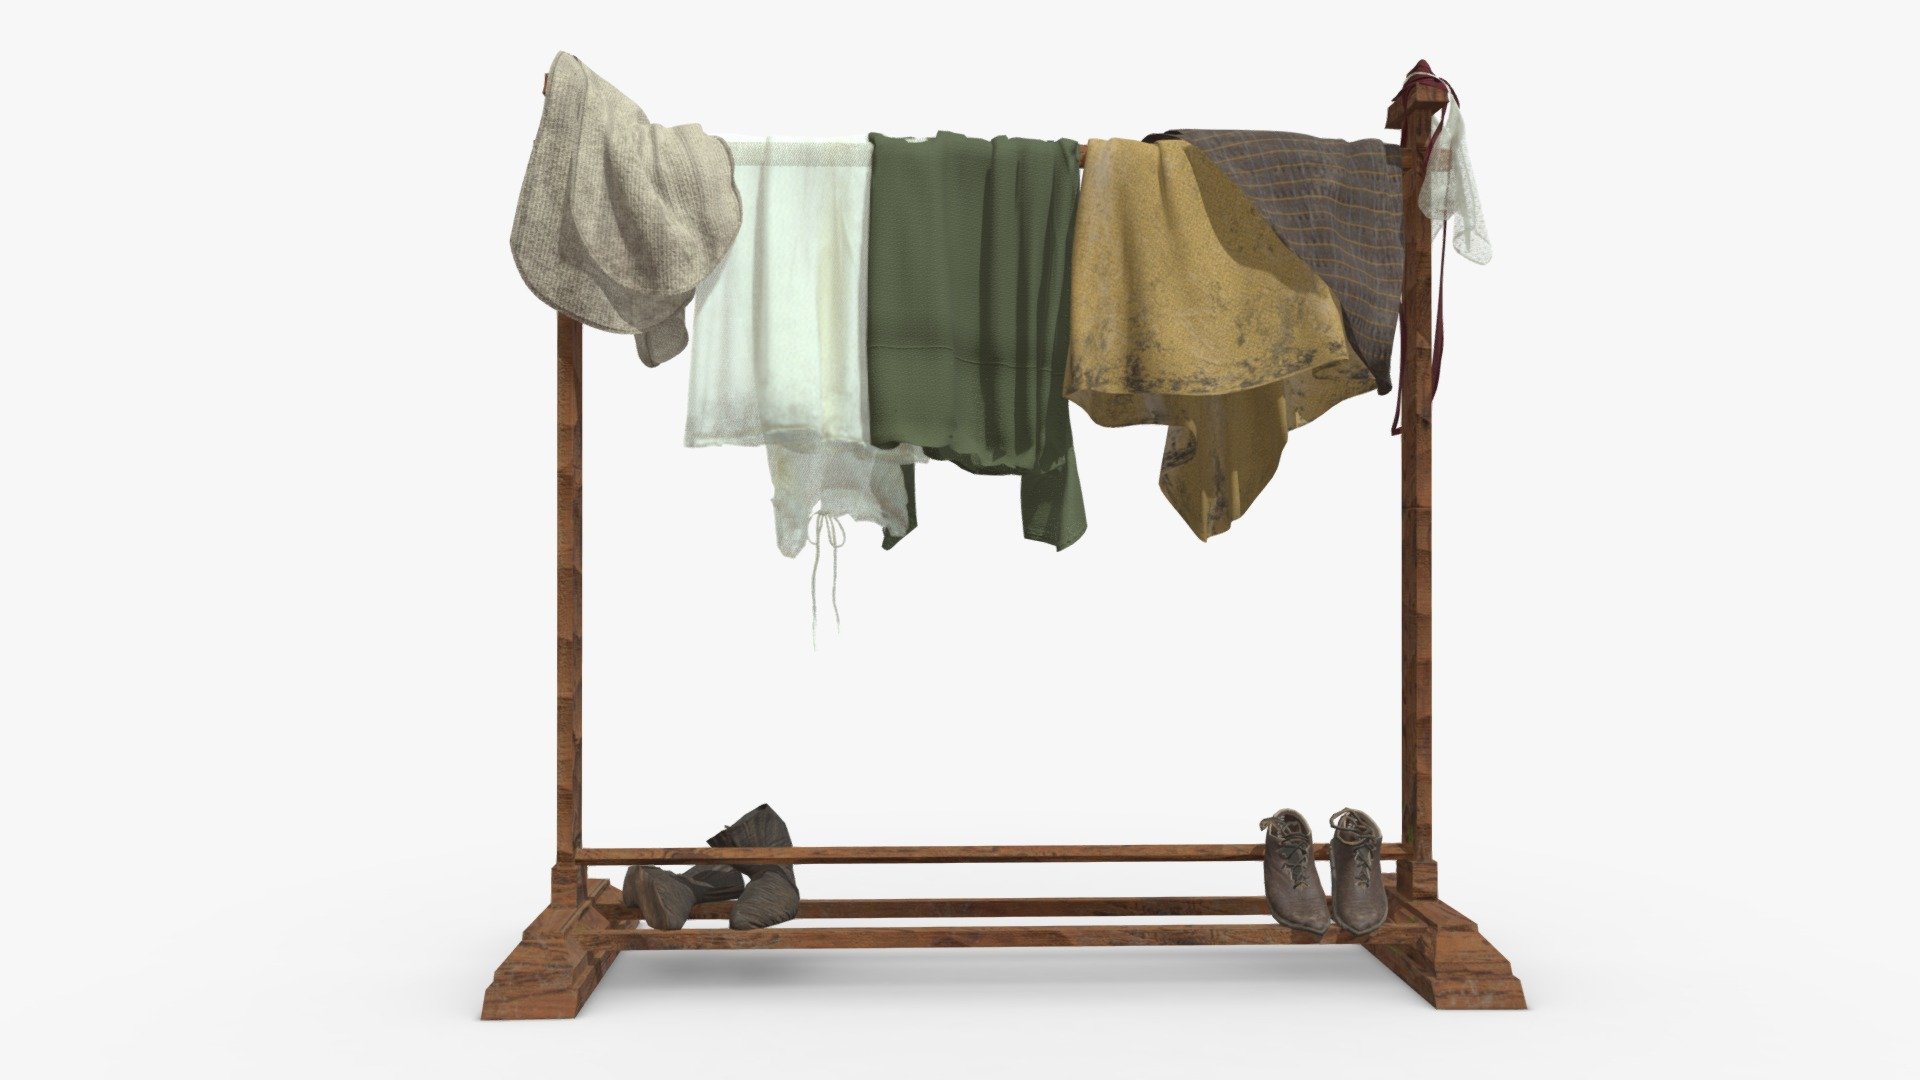 Check out my website for more products and better deals! &amp;gt;&amp;gt; SM5 by Heledahn &amp;lt;&amp;lt;

This is a digital 3D model of a medieval style clothes rack The rack is made of carved teak wood, and is weathered with dust and lichen. The rack is made of carved teak wood, and is weathered with dust and lichen. It has a top bar from where clothes can be hanged, and three bottom bars to arrange shoes.

There are several medieval style garments hanging from the bar in a casual way, also two pairs of shoes in the bottom bars.

This product will achieve realistic results in your rendering projects and animations, being greatly suited for close-ups due to their high quality topology and PBR shading.

The product contains Albedo, Roughness, Height, and Normal map (OpenGL) textures 3d model